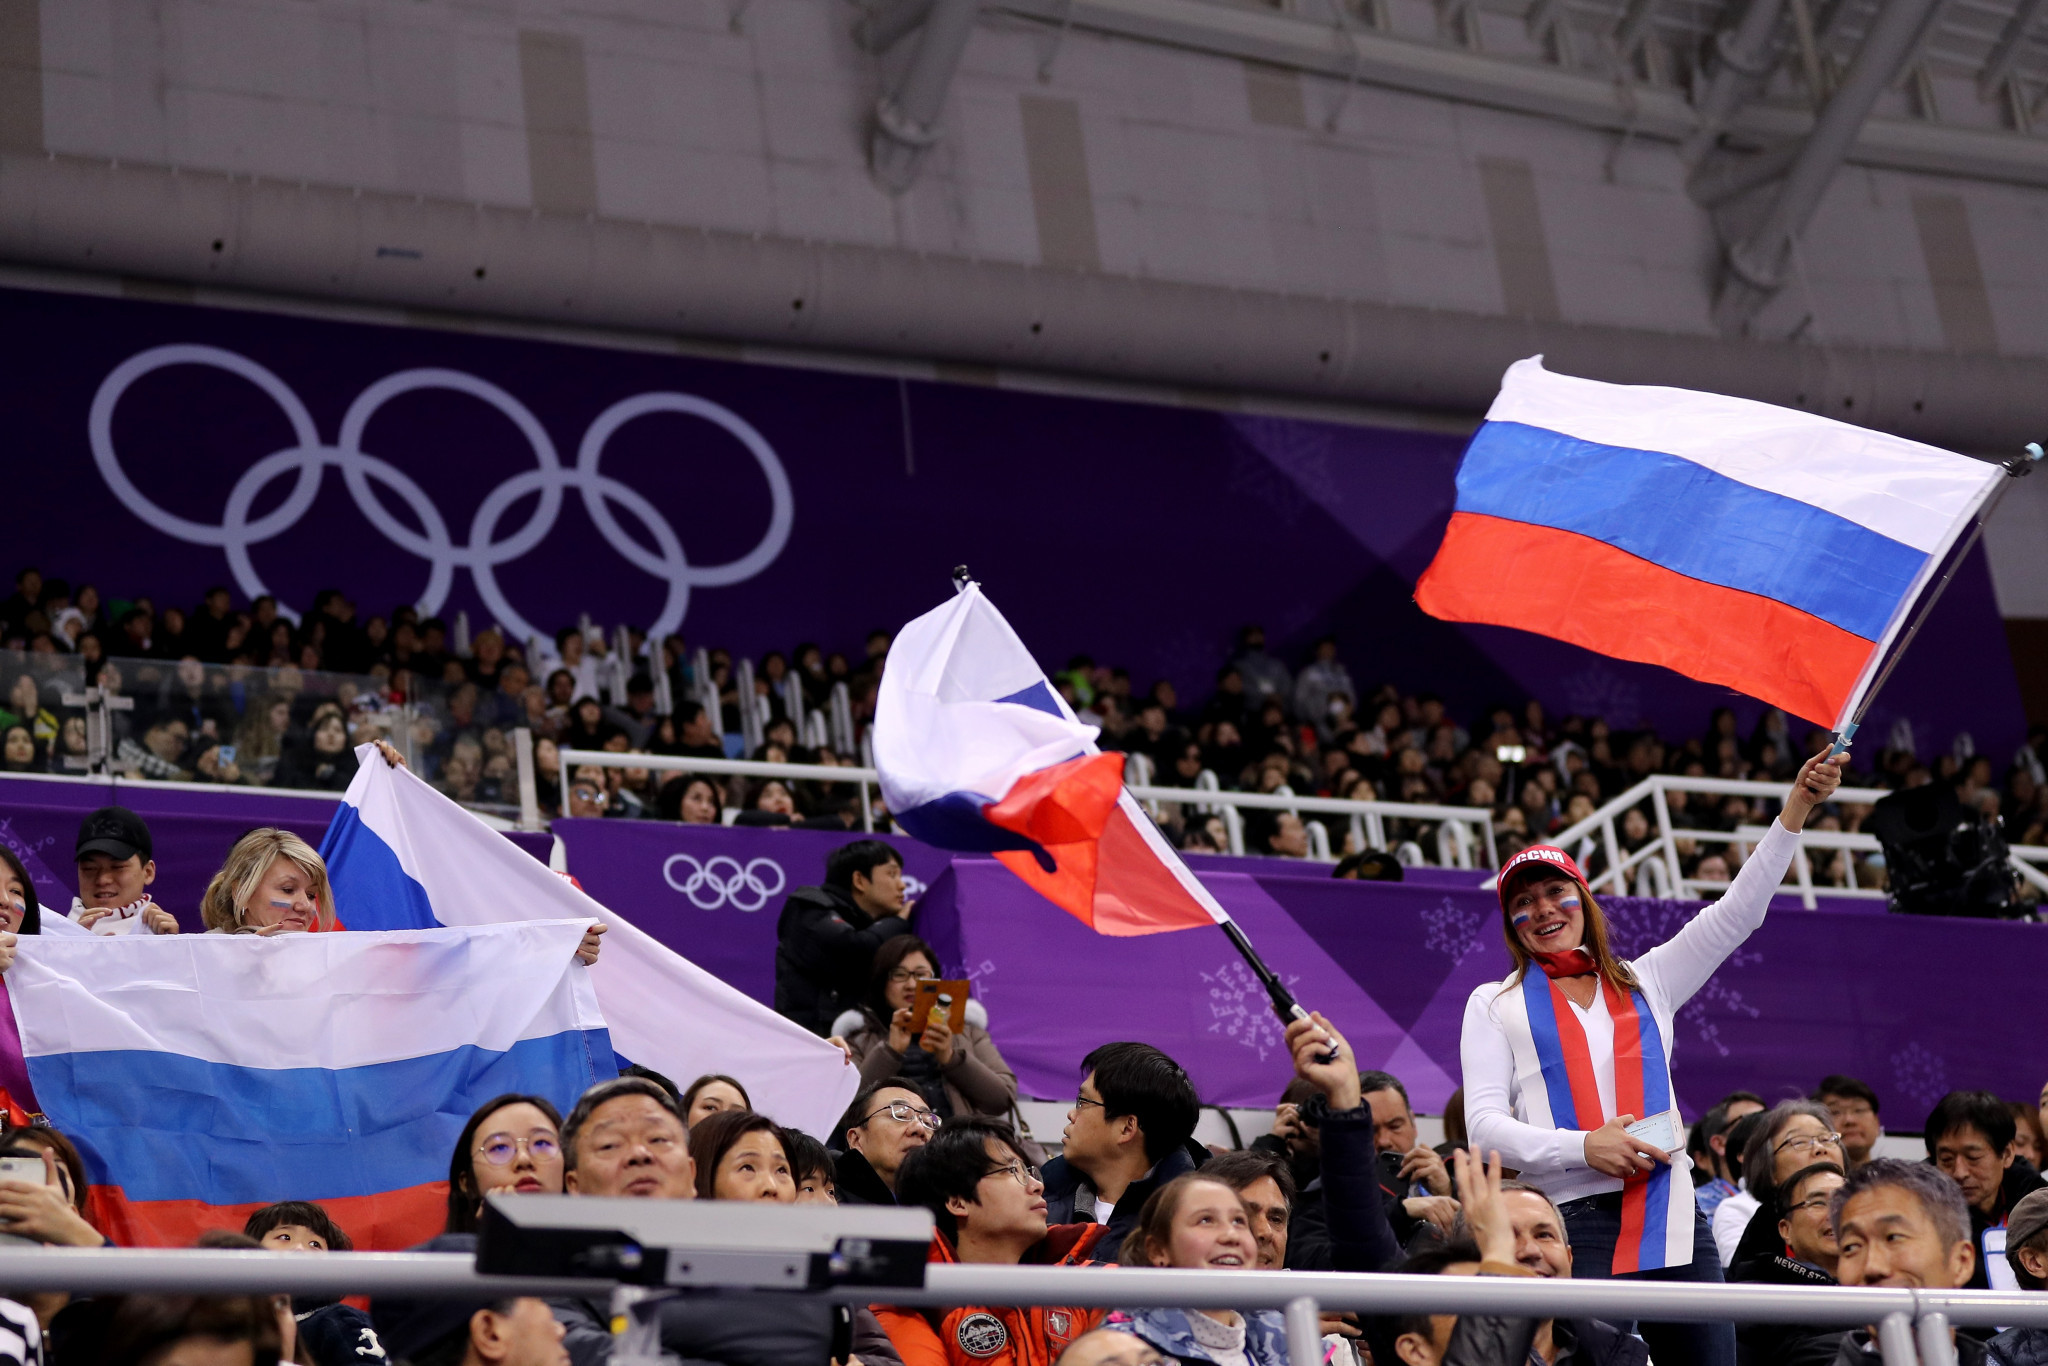 Russian President Vladimir Putin has called the IOC's restrictions against athletes from his country as 